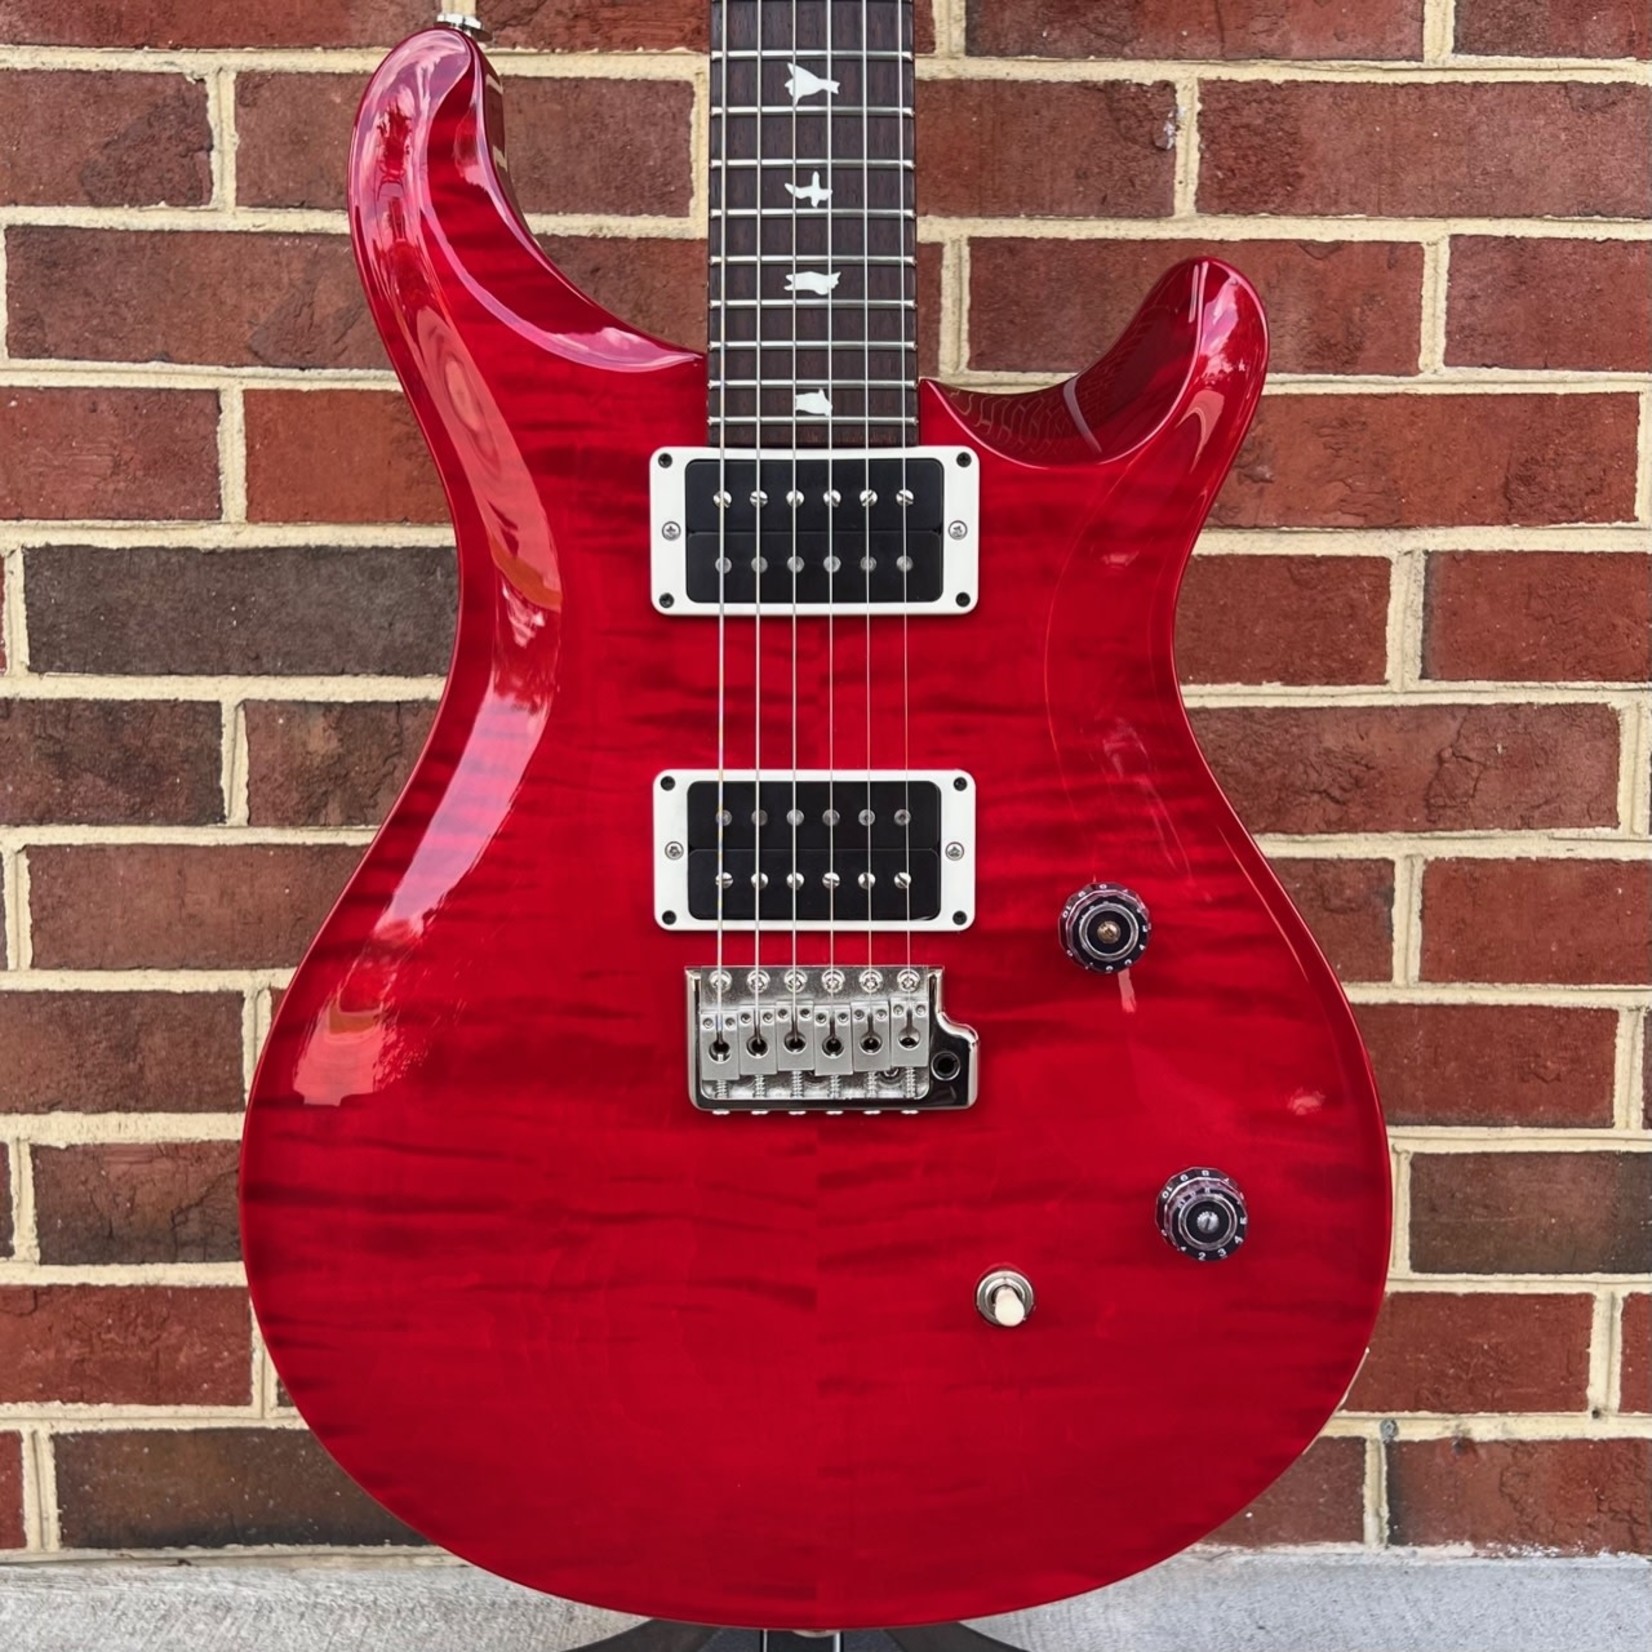 Paul Reed Smith Paul Reed Smith CE24, 2019 Model, Scarlet Red, Flame Maple Top, Mahogany Body, Maple Neck, Rosewood Fretboard, Gig Bag (USED)